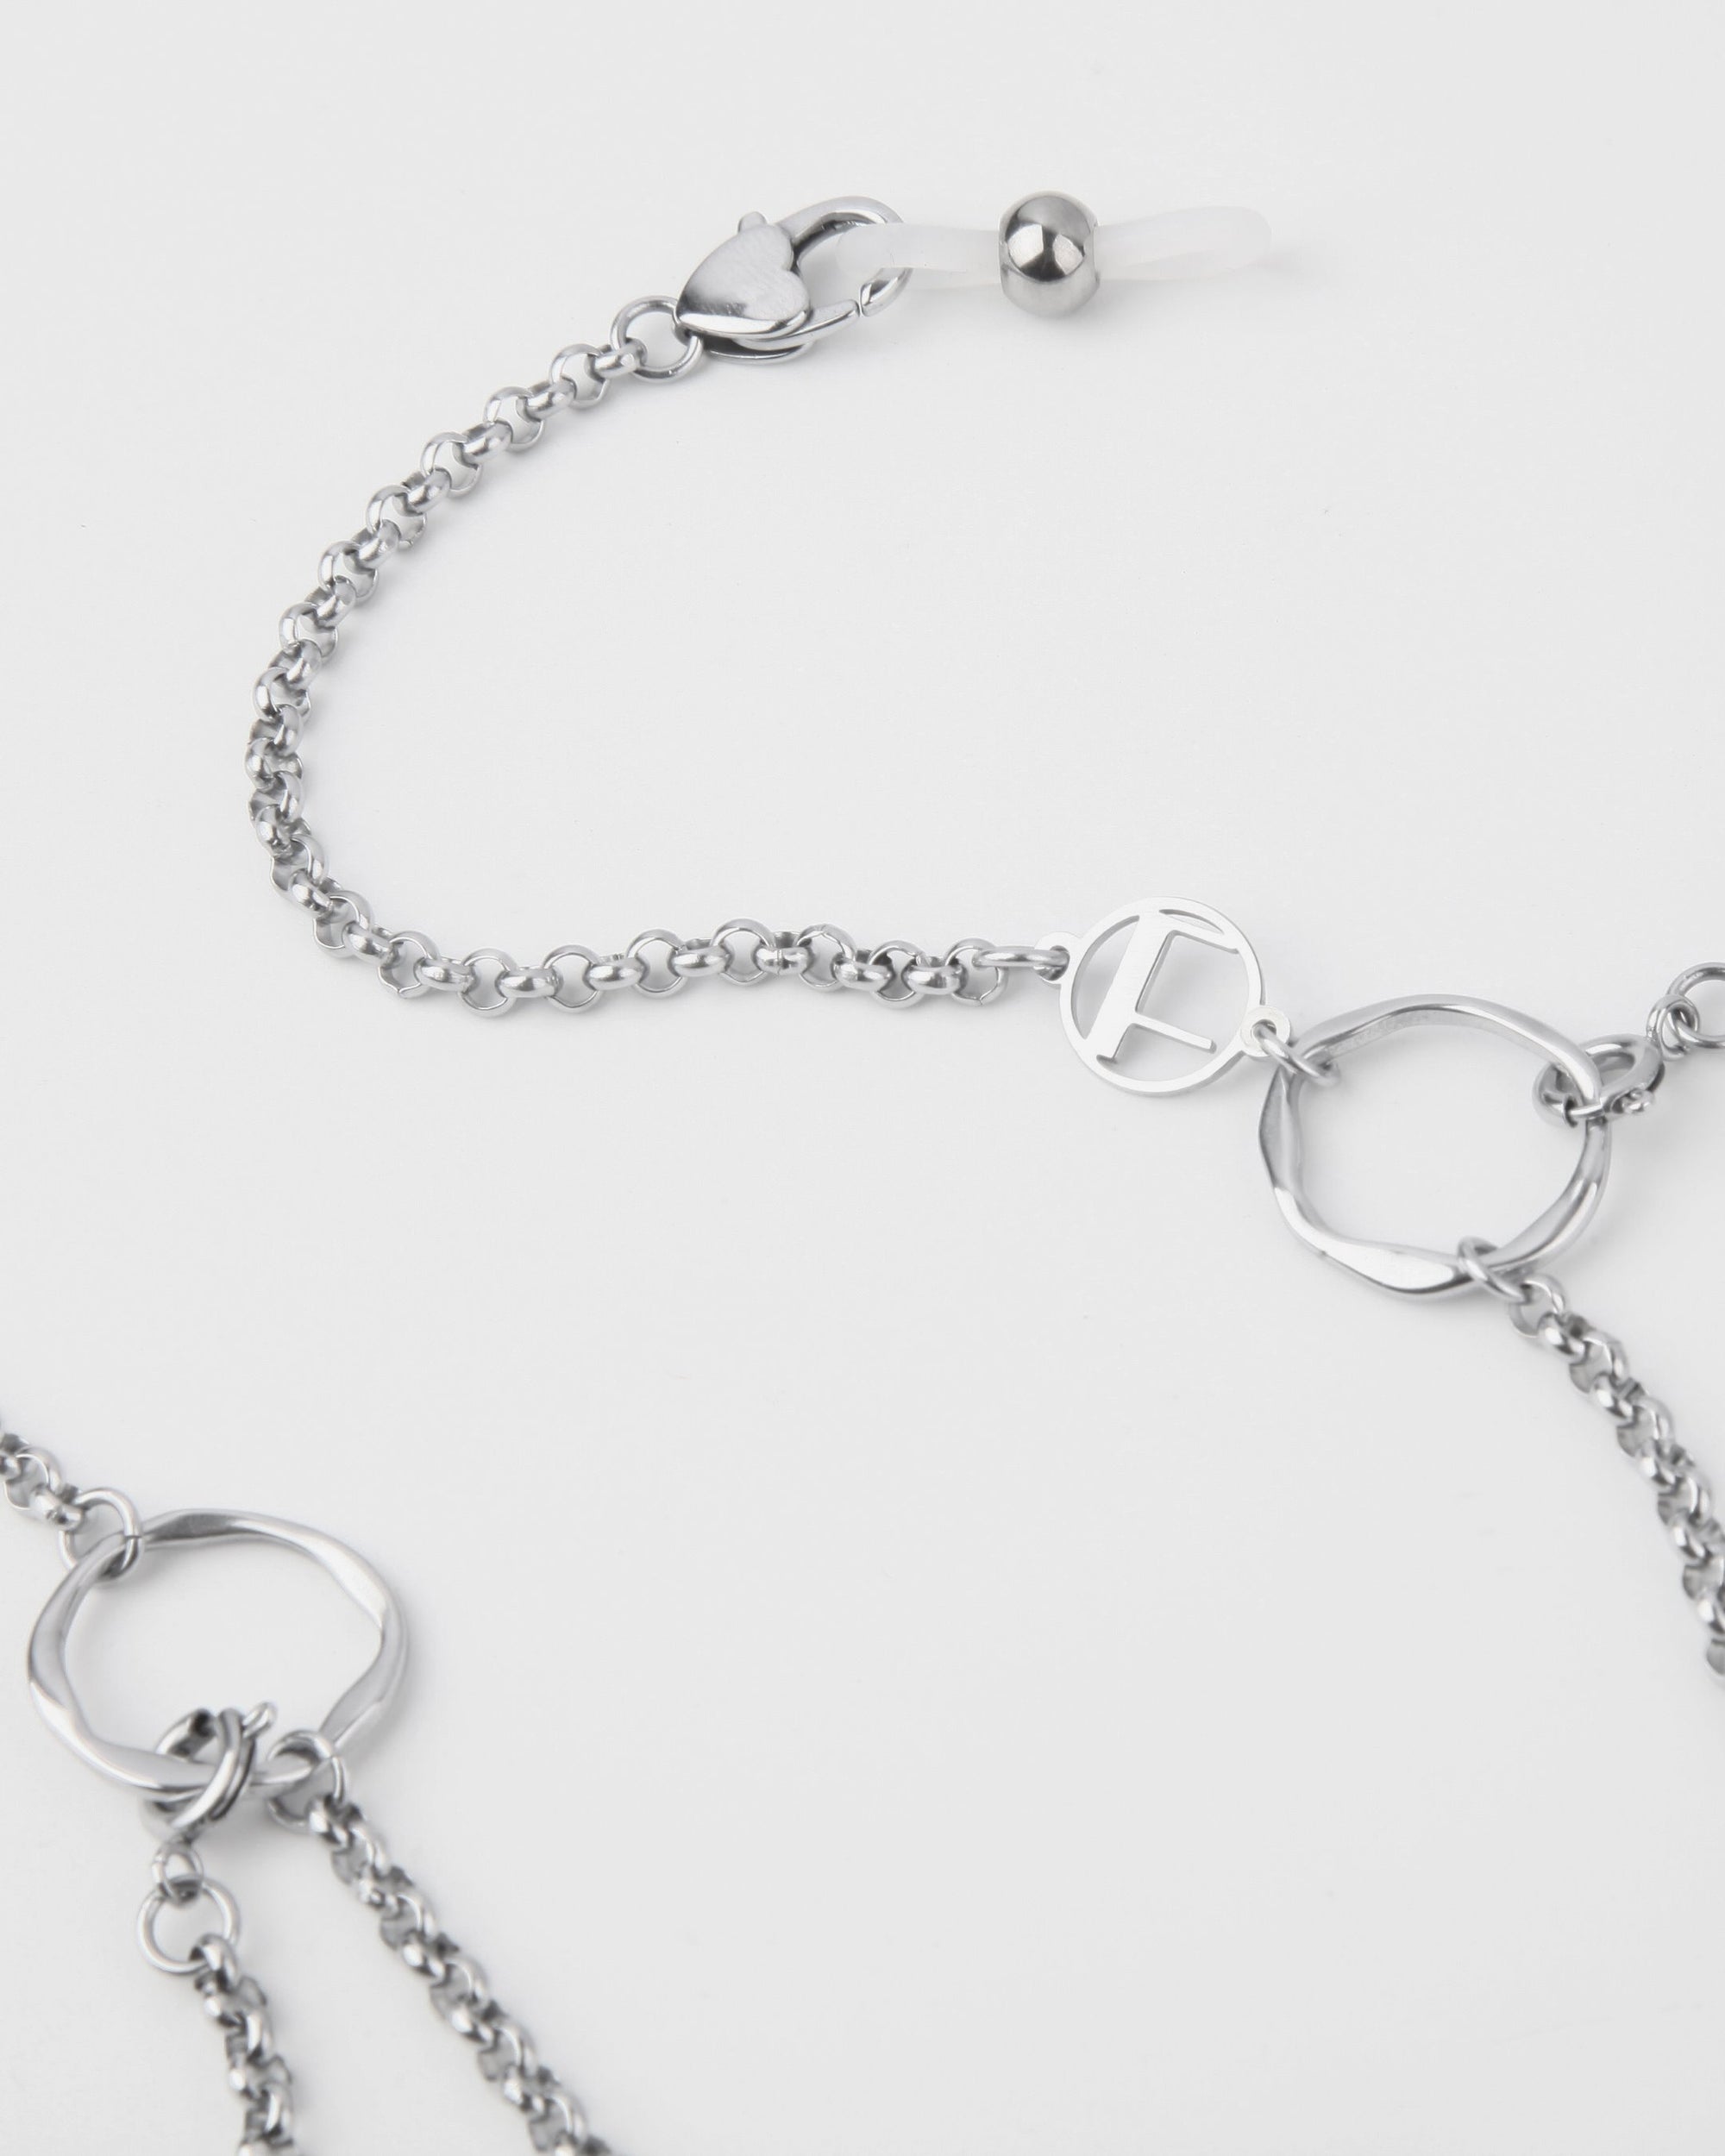 A close-up image of a For Art&#39;s Sake® Florentina Glasses Chain featuring various circular links, crafted from palladium-plated stainless steel. The glasses chain includes a decorative pendant with a stylized letter &quot;F&quot; and a clasp adorned with a small heart-shaped charm. The background is a clean white.